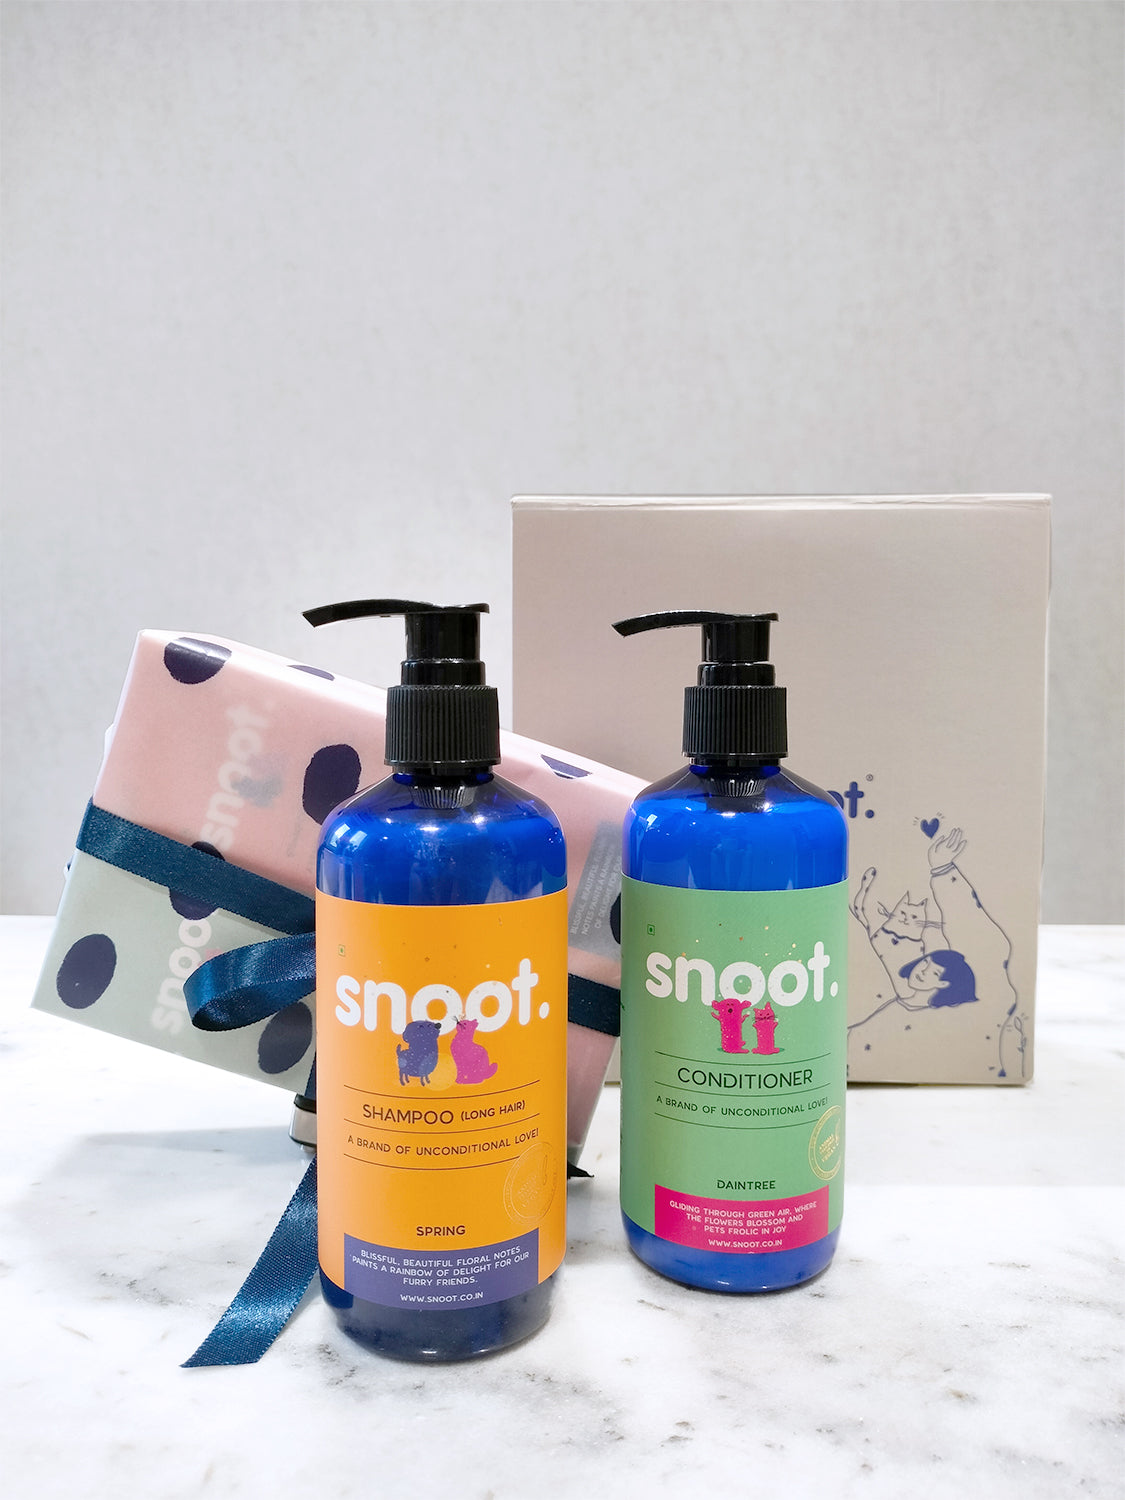 Gift Set for Pets, Dogs, and Cats featuring a combination of Pet Shampoo and Conditioner